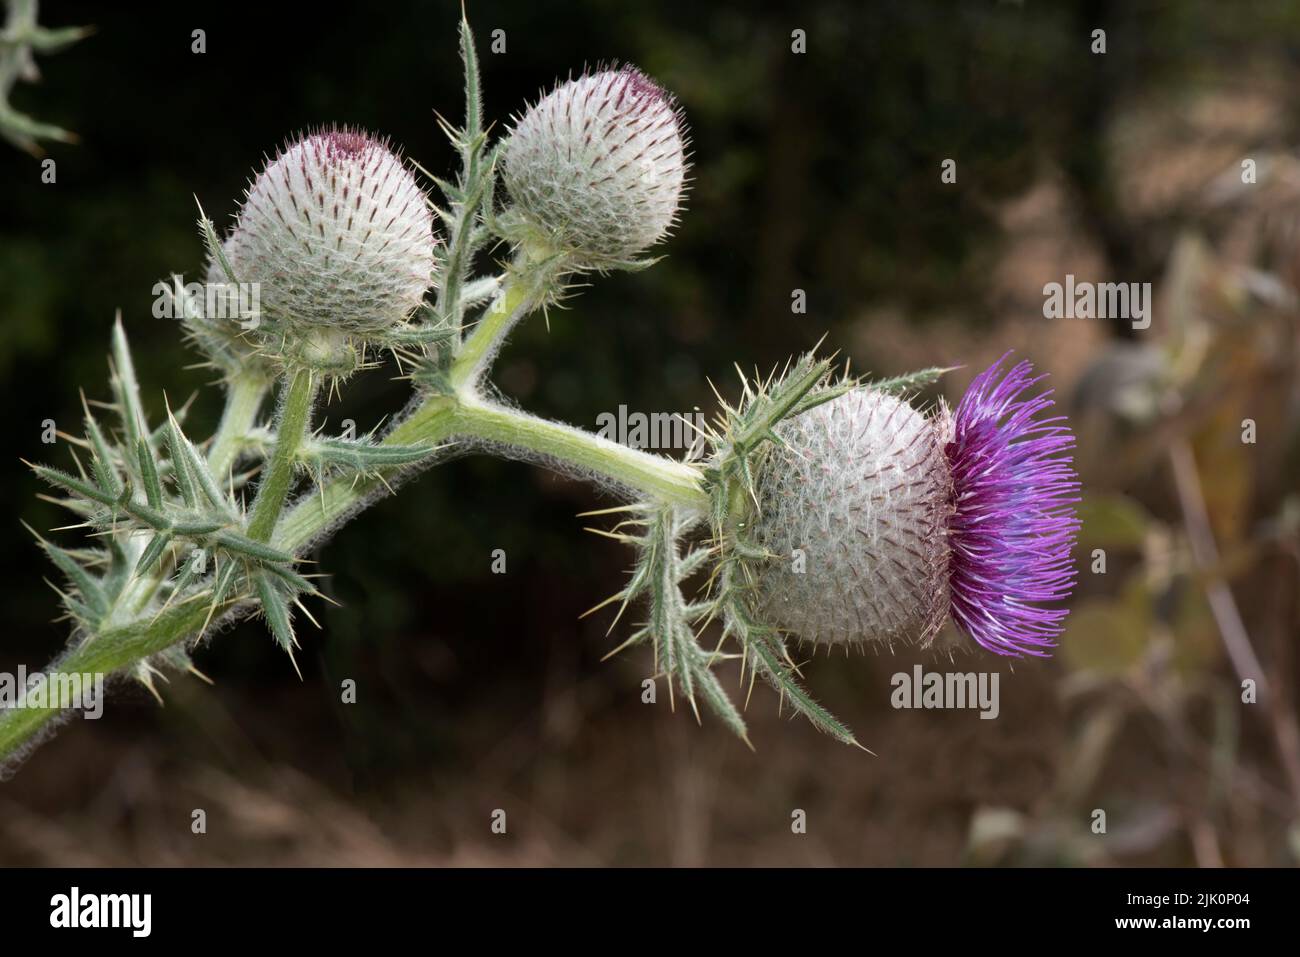 Woolly thistle (Cirsium eriophorum) flowering with purple disc florets on a tall spiny leaved plant and unopened buds, Berkshire, July. Stock Photo